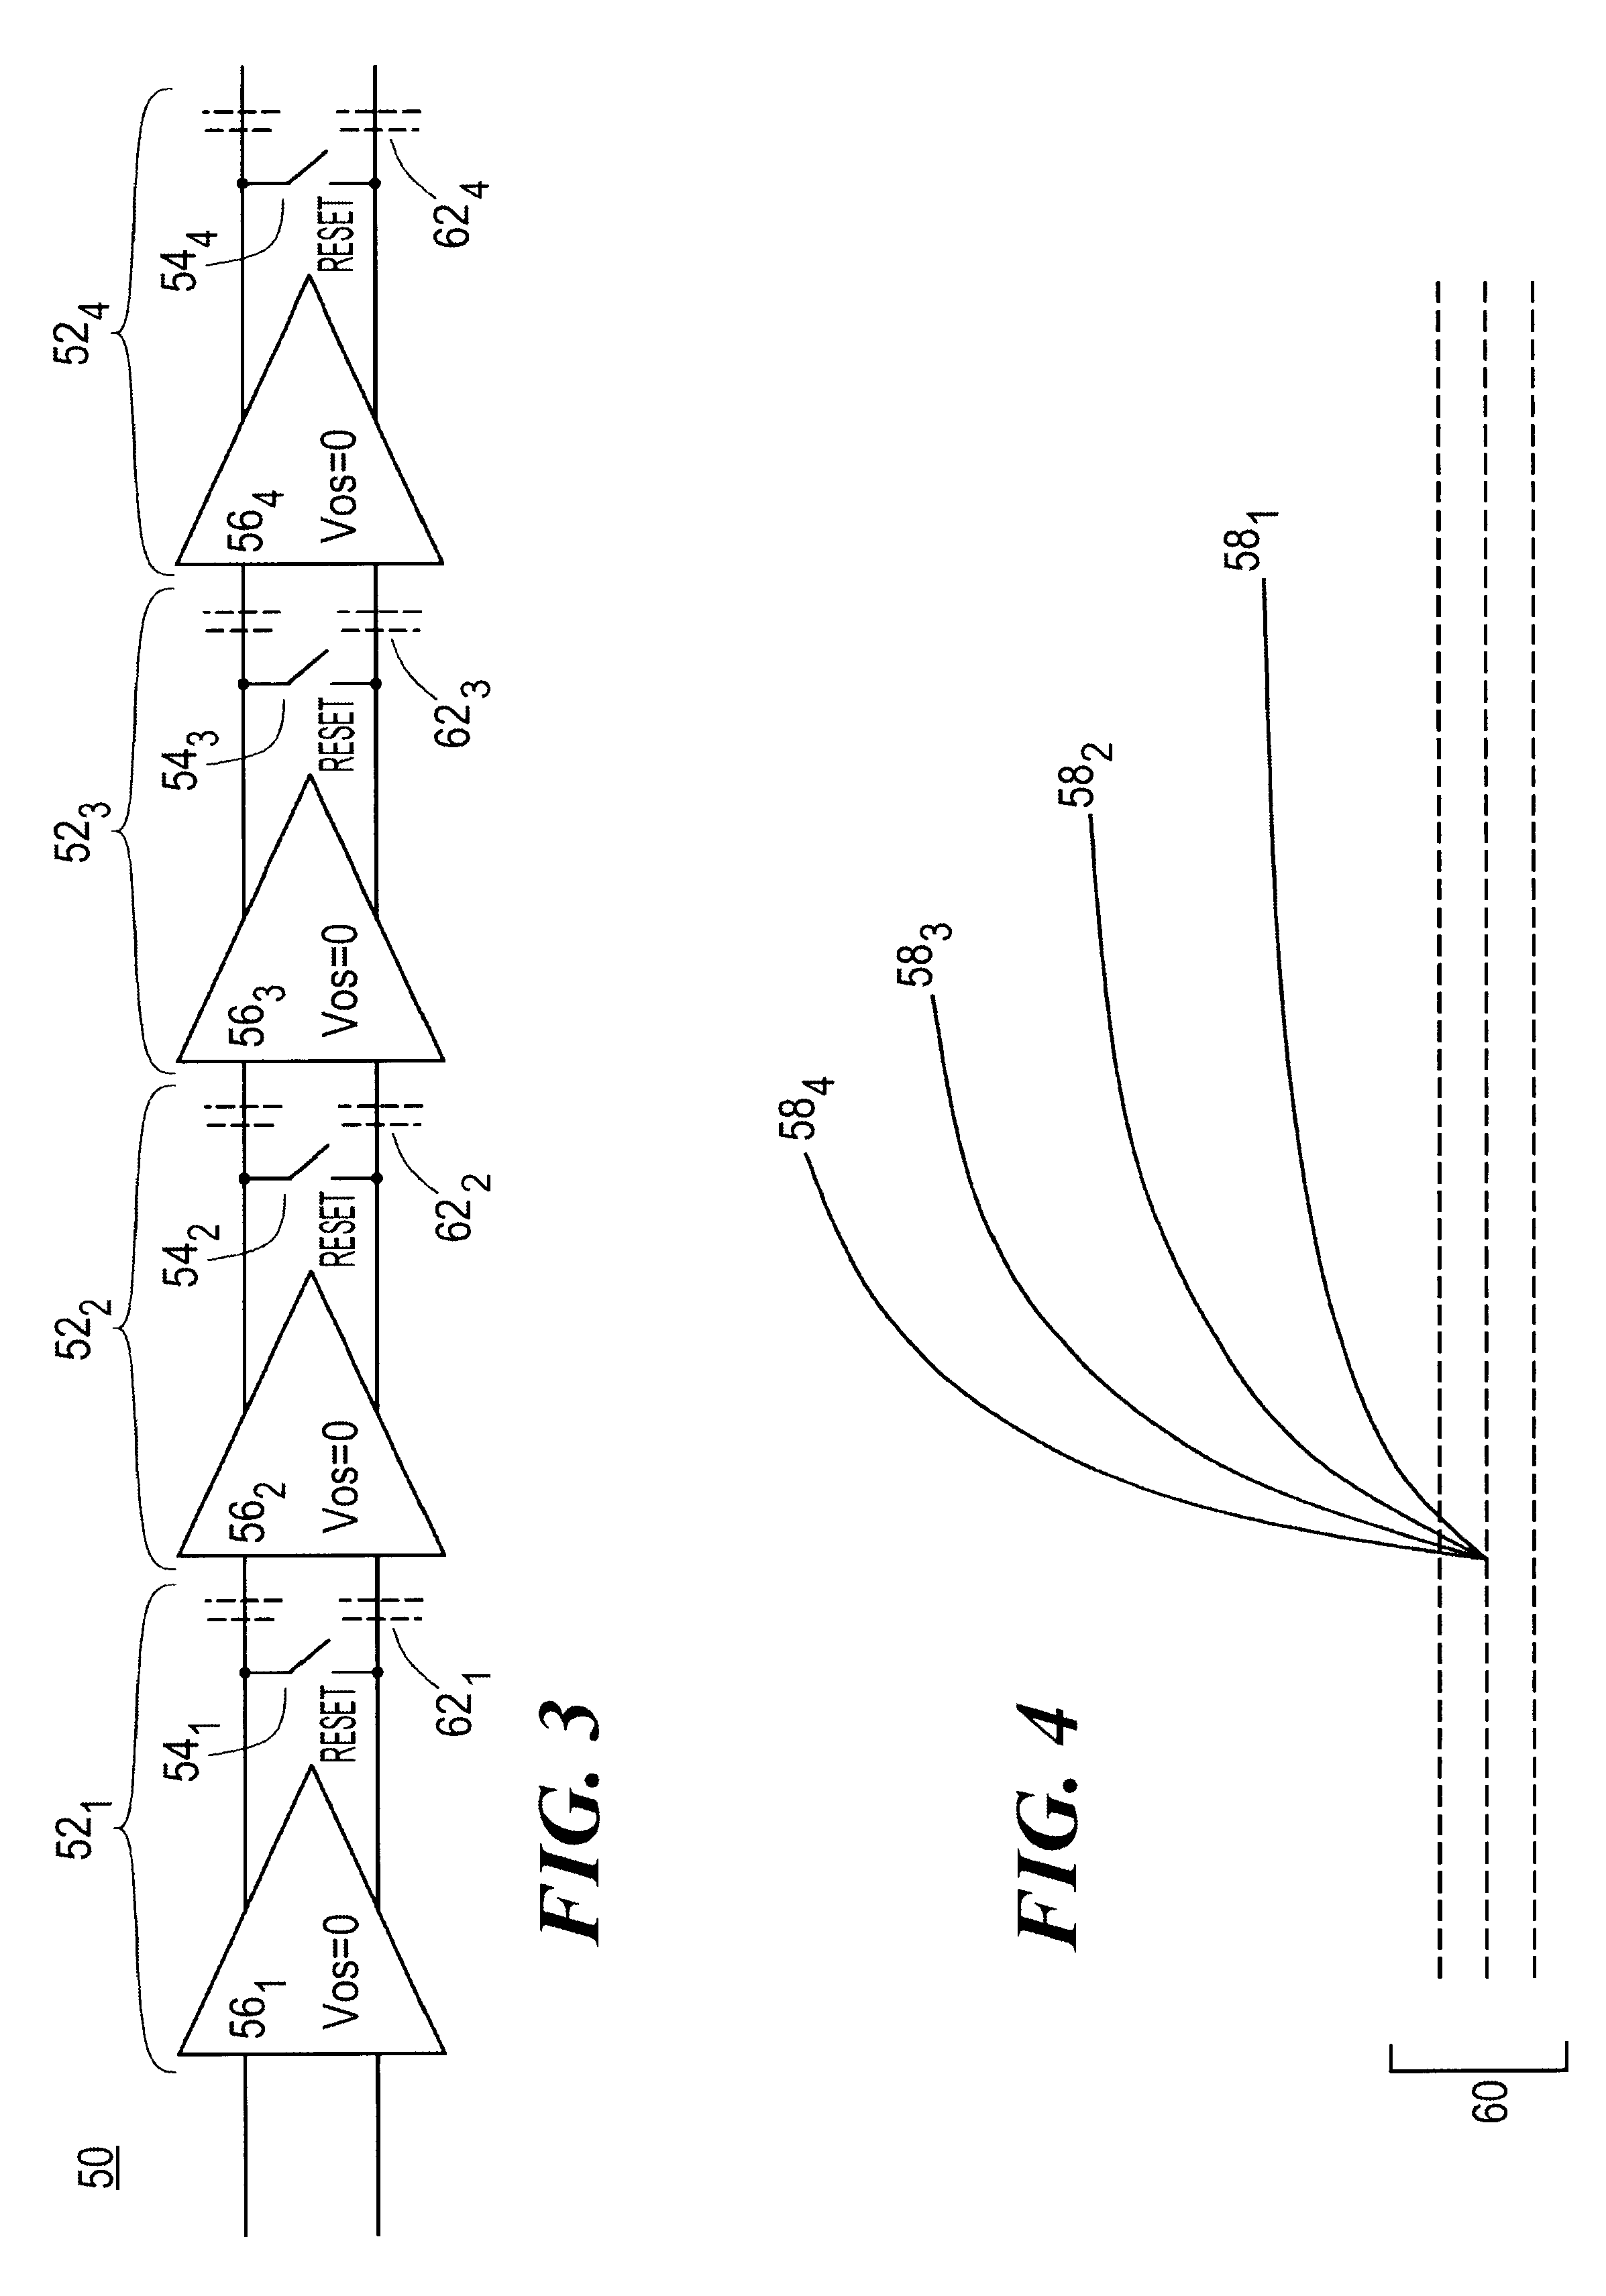 Multi-stage, low-offset, fast-recovery, comparator system and method